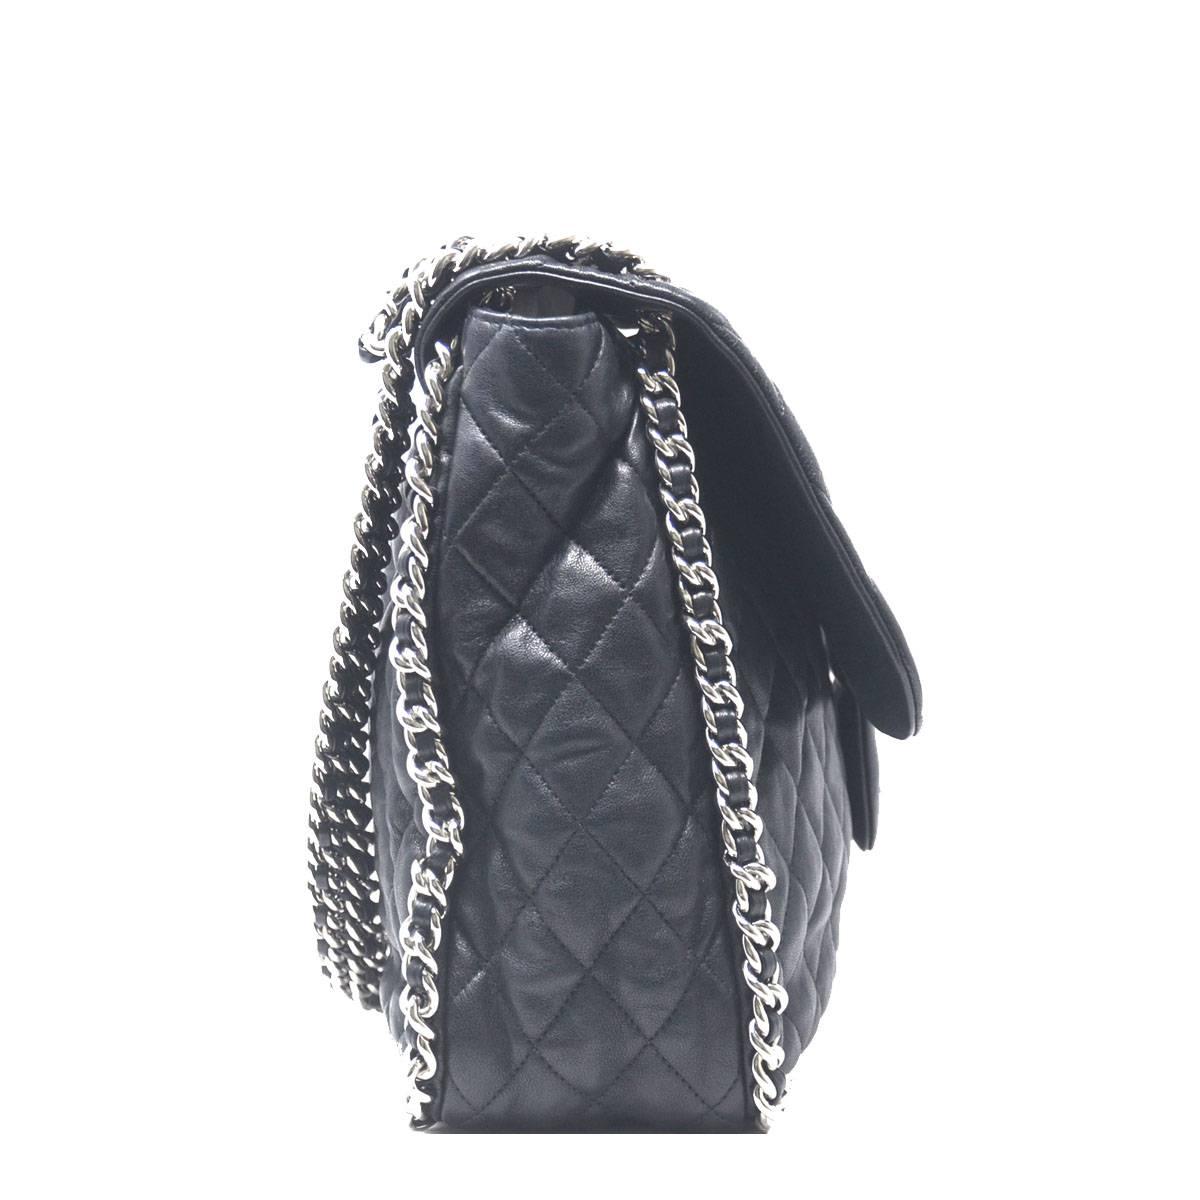 Company-Chanel
Model-Maxi Handbag With Silver Hardware 
Color-Black
Date Code-15370290
Material-Leather
Measurements-13.5